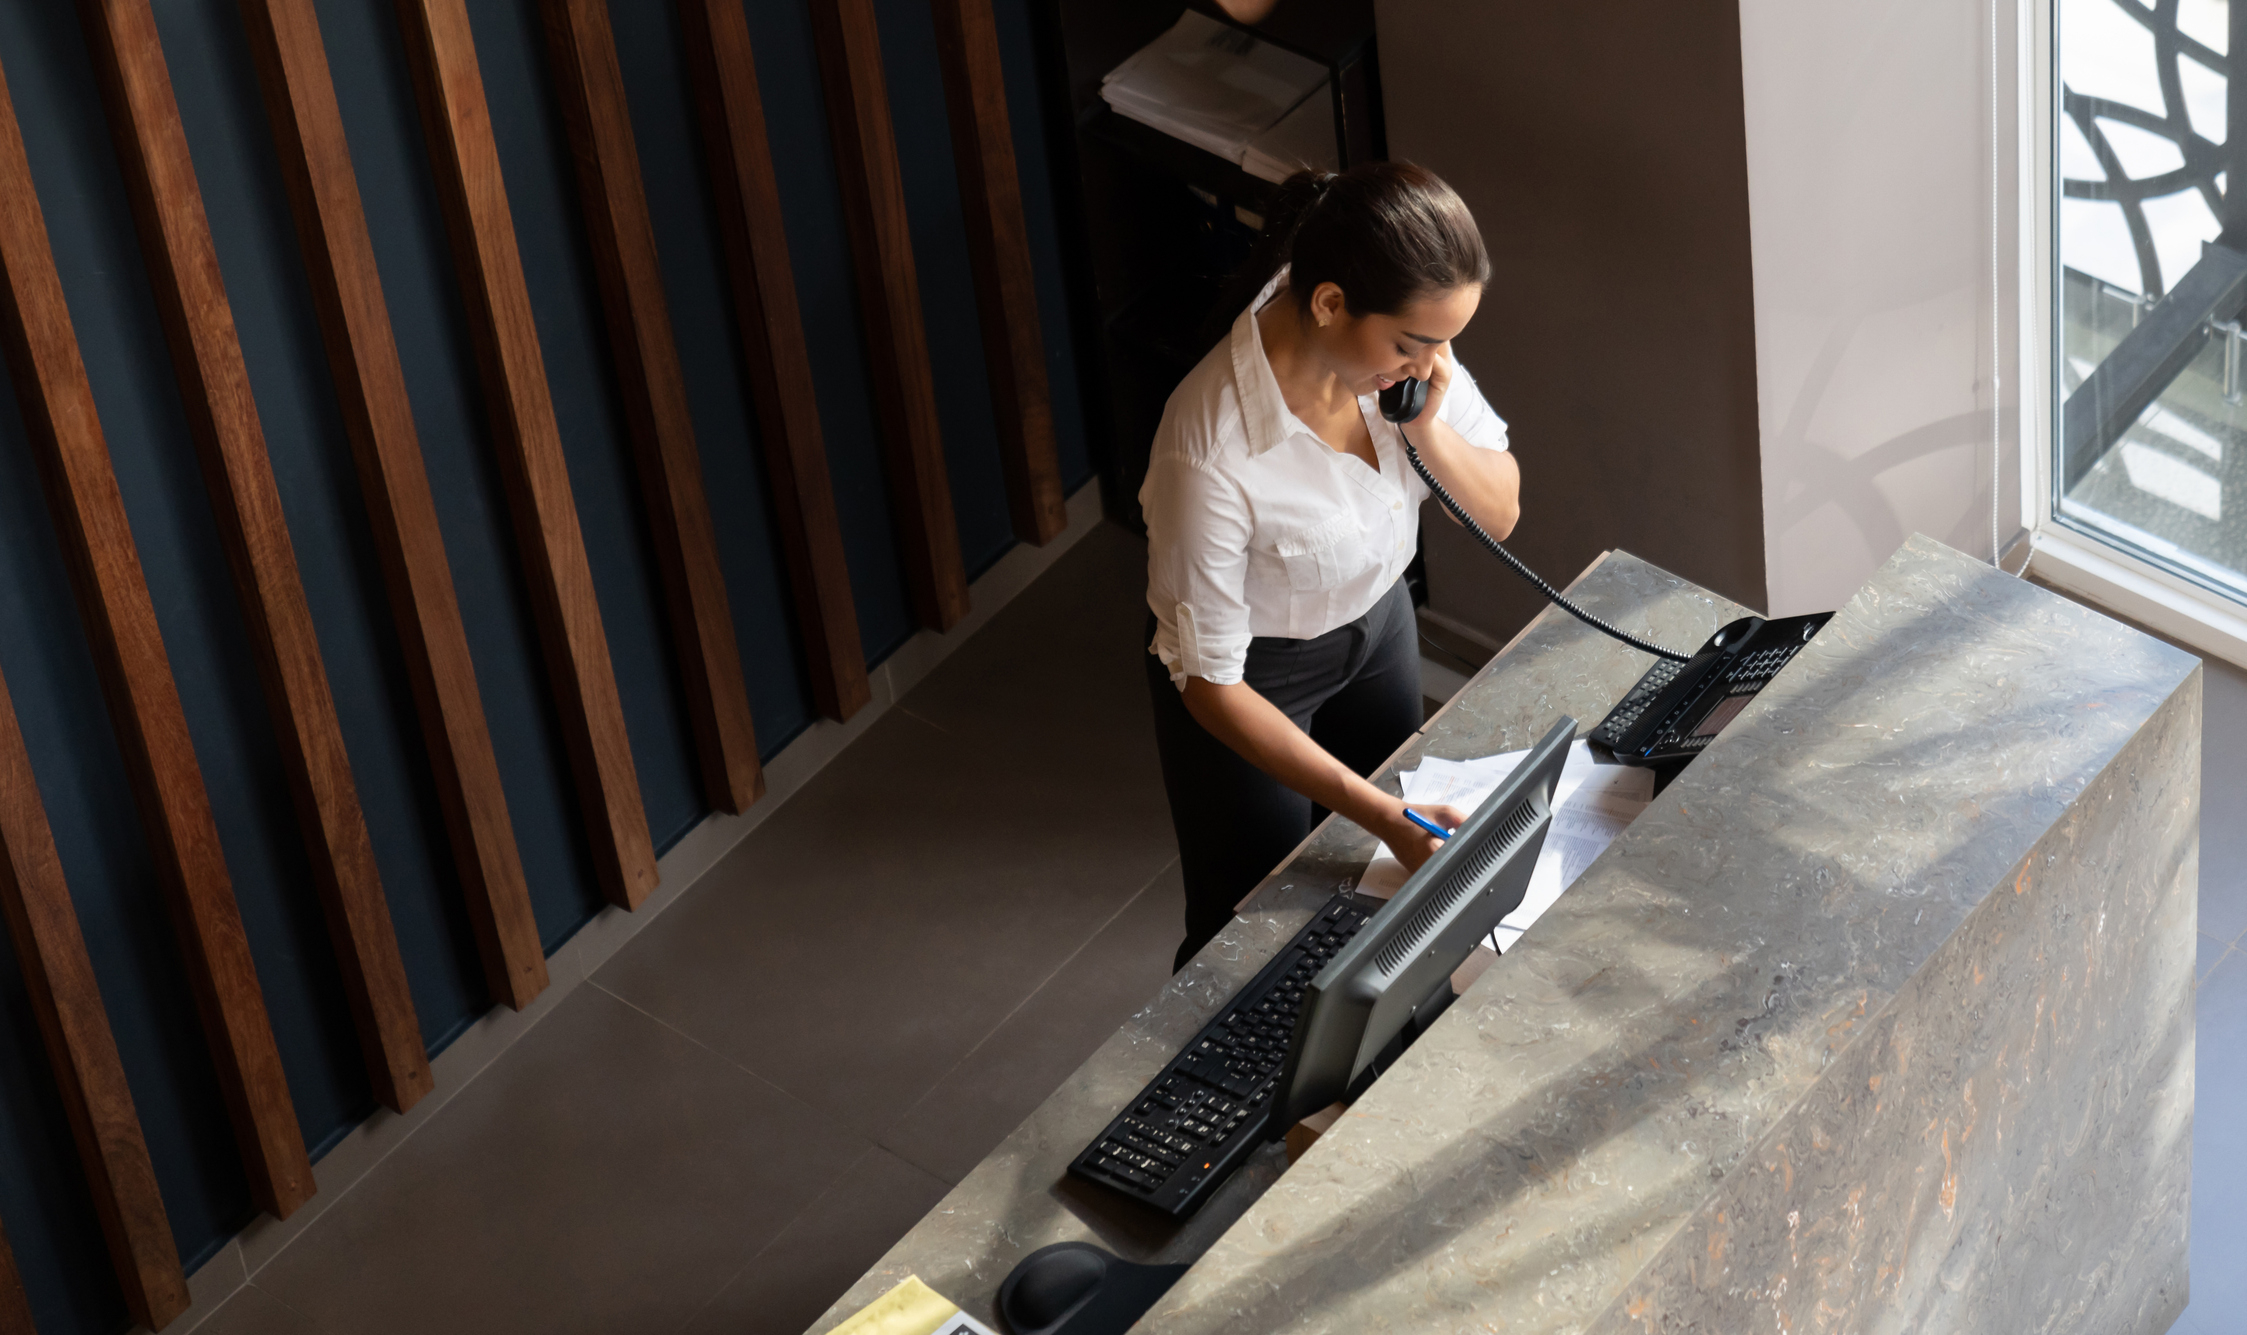 A receptionist talking on the phone while checking papers at a front desk